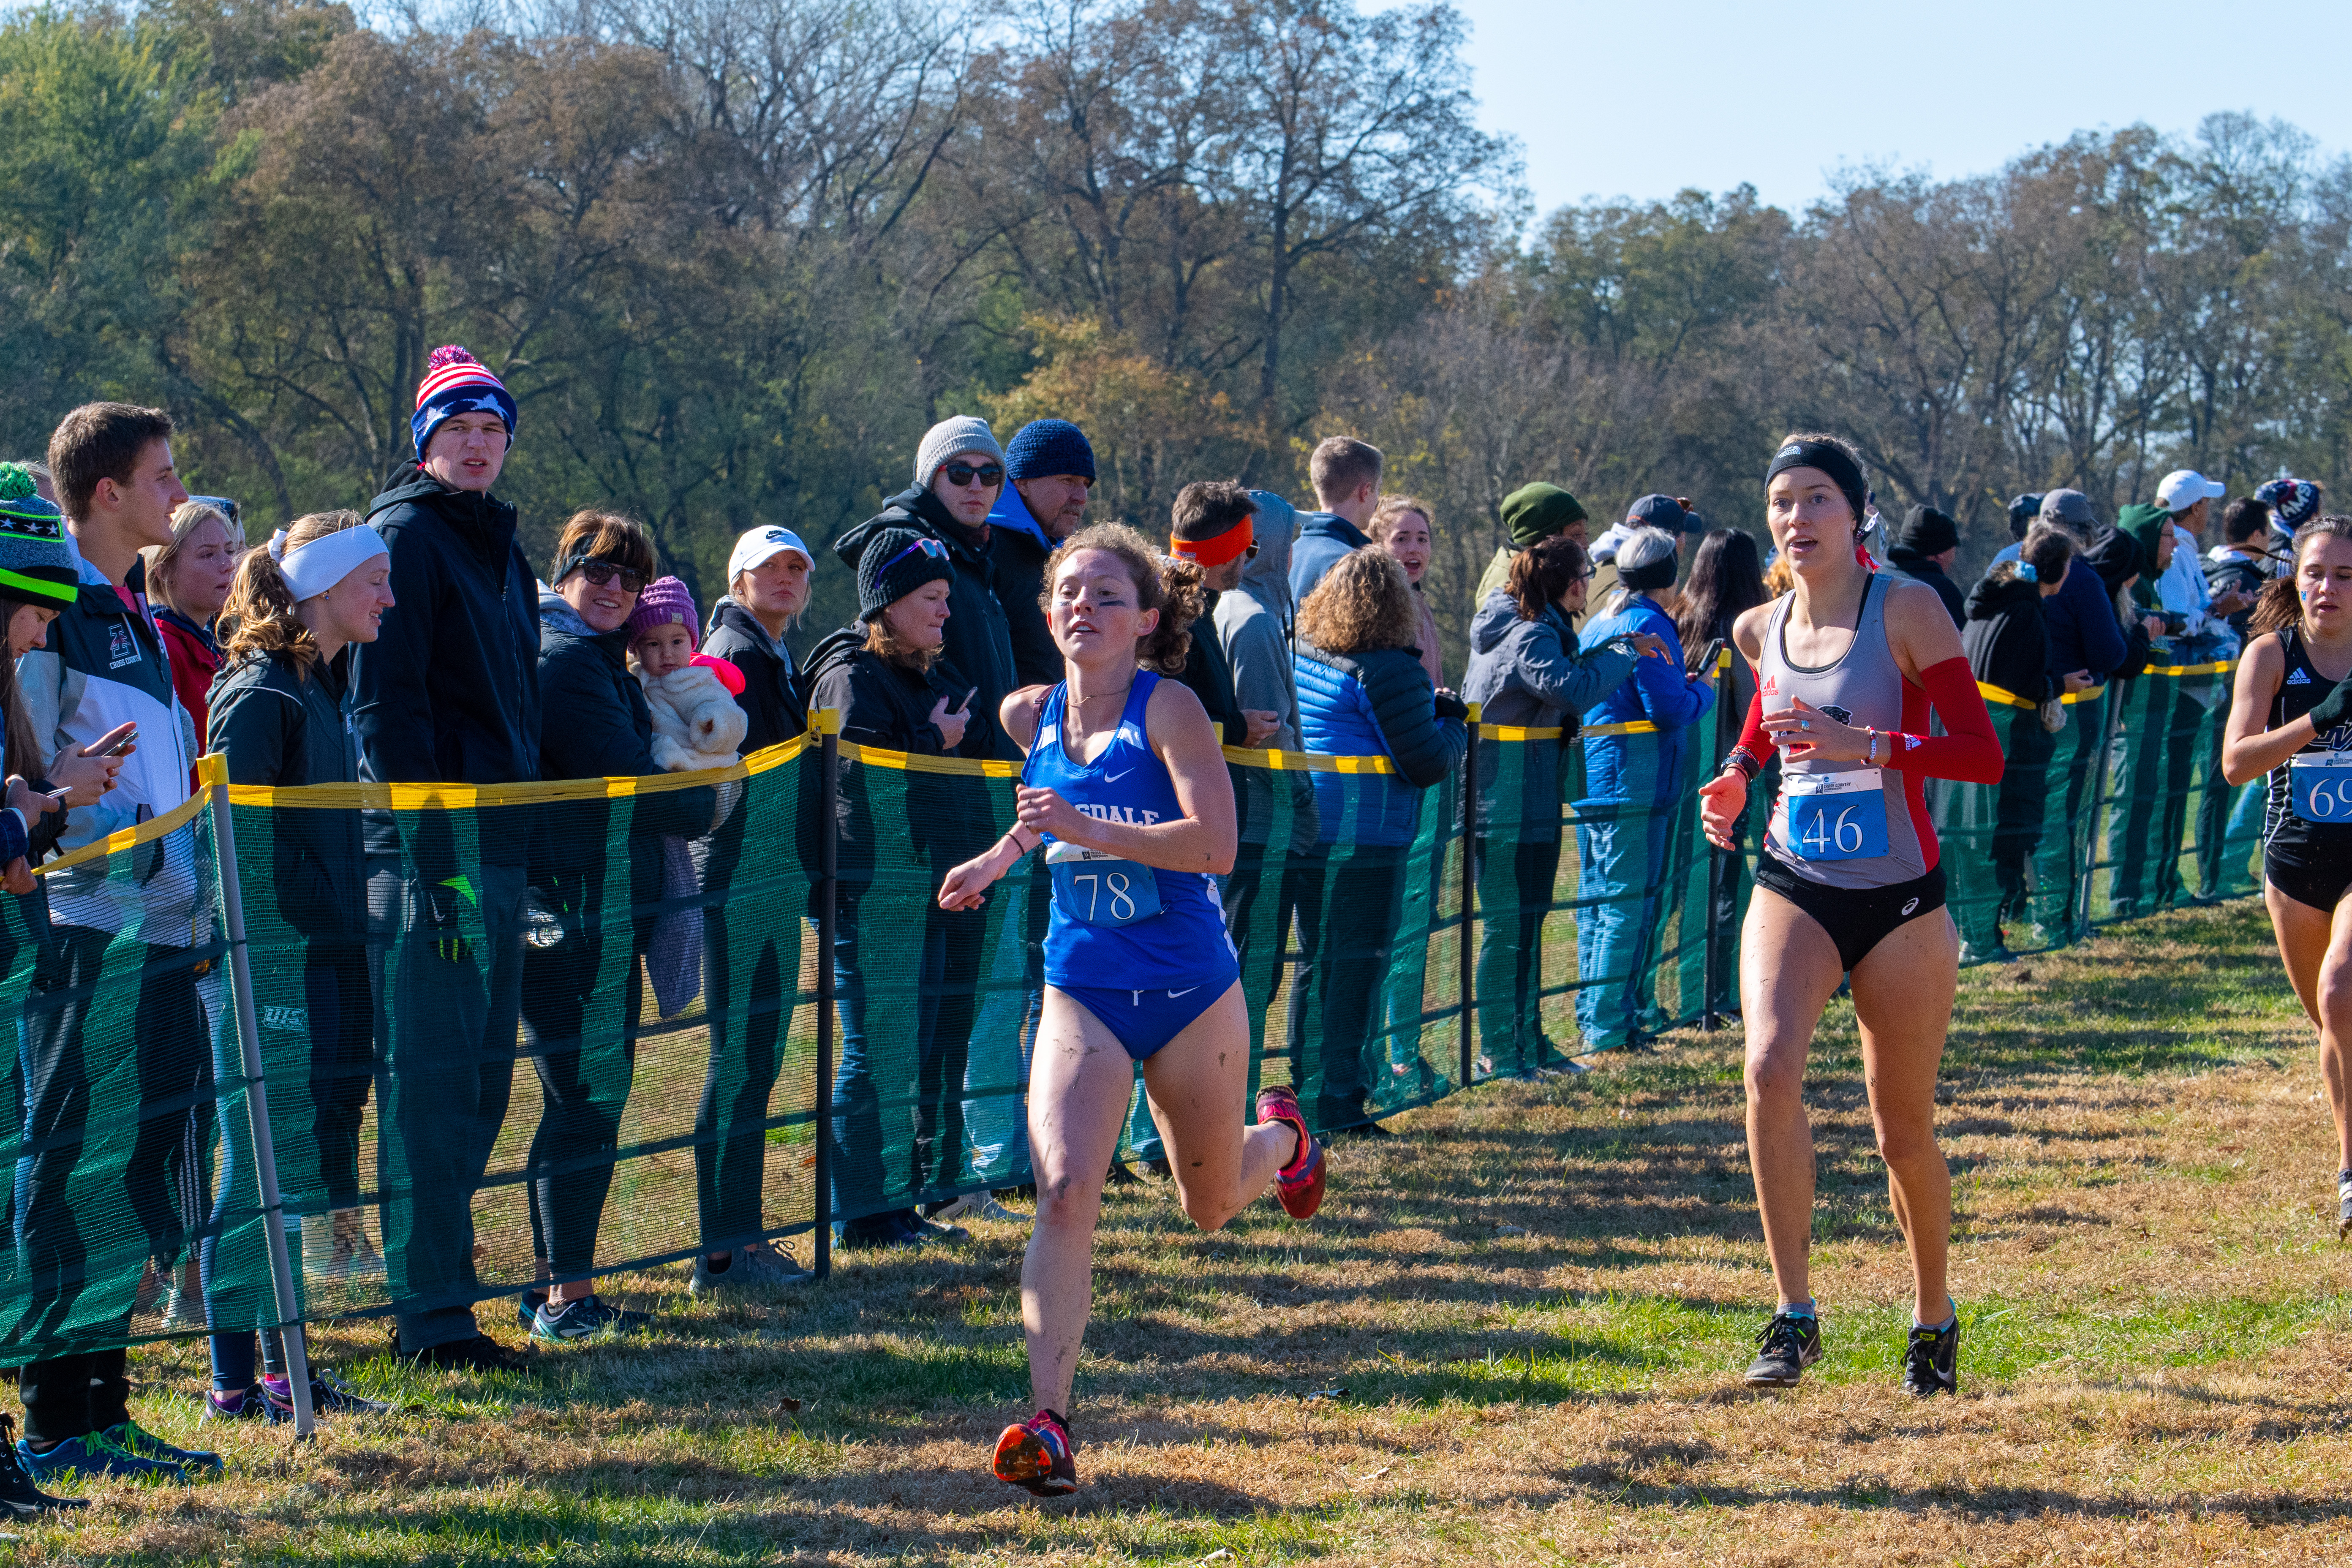 Humes, women’s team to run at national meet